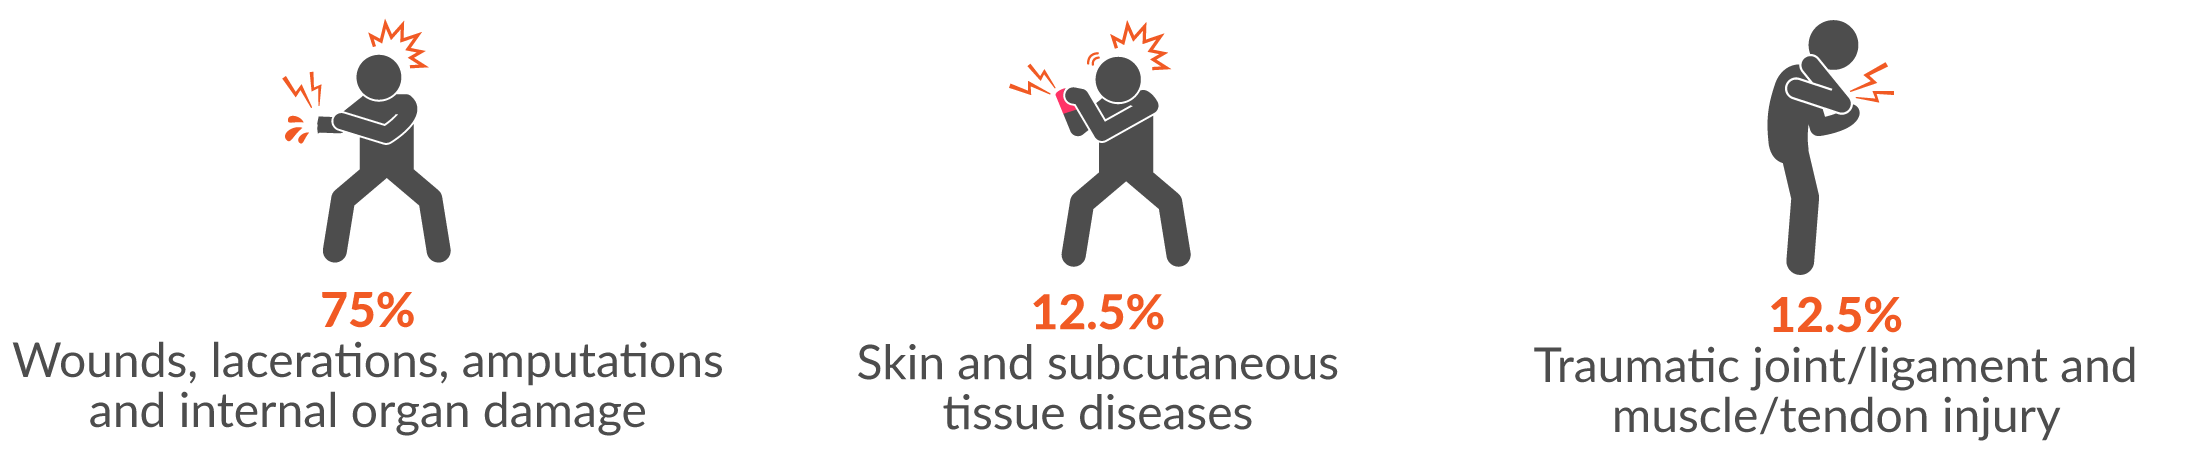 This infographic shows the main two injury groups resulting from hitting objects with a part of the body were 75% wounds, lacerations, amputations and internal organ damage; 12.5% skin and subcutaneous tissue diseases and traumatic joint/ligament and muscle/tendon injury (also 12.5%).